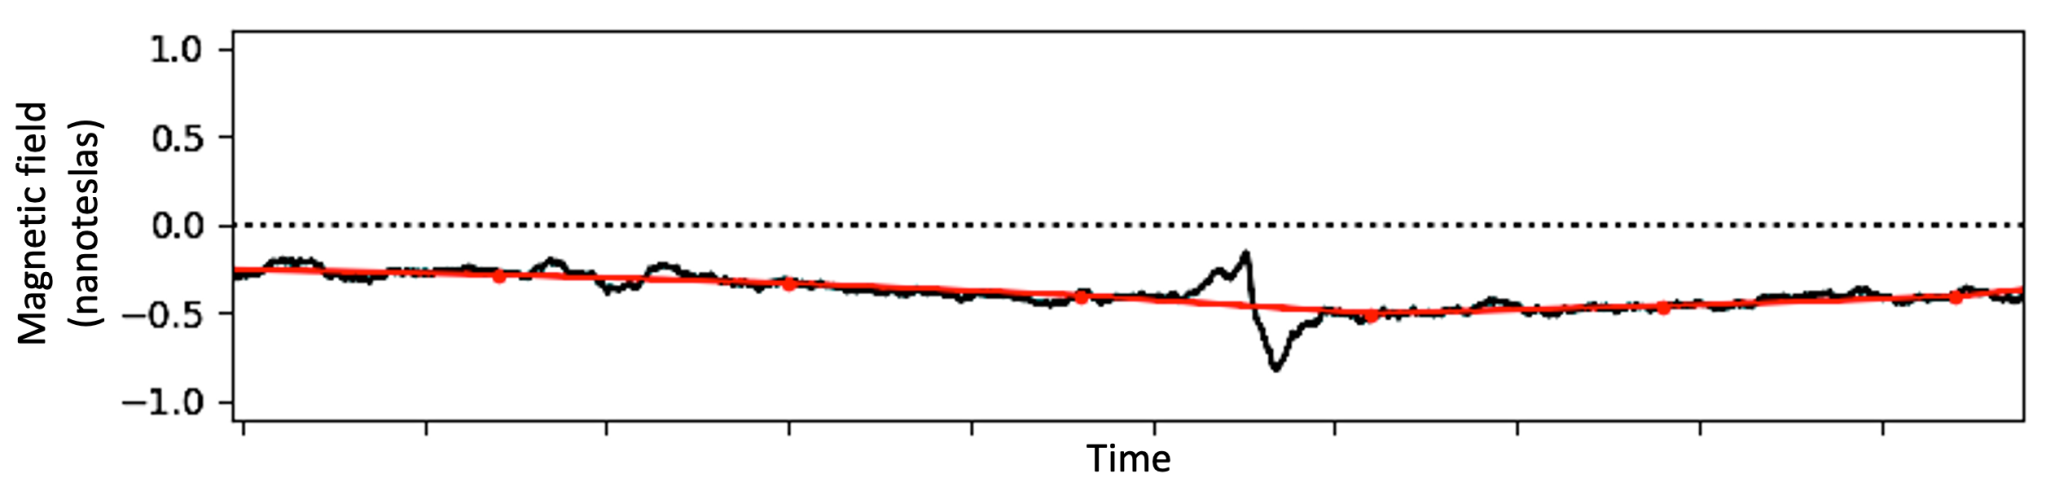 A graph shows time along the bottom, horizontal axis and magnetic field (nanoteslas) along the left vertical axis, with -1.0 at the bottom, 0 in the middle, and 1.0 at the top. A dotted line extends horizontally across the graph to the right of the 0. Below the dotted line is a nearly horizontal red line that dips slightly on the right side of the graph and then rises again on the far right. A black wiggly line roughly follows the red line, showing a sharp increase and then a sharp decrease near where the red line dips.